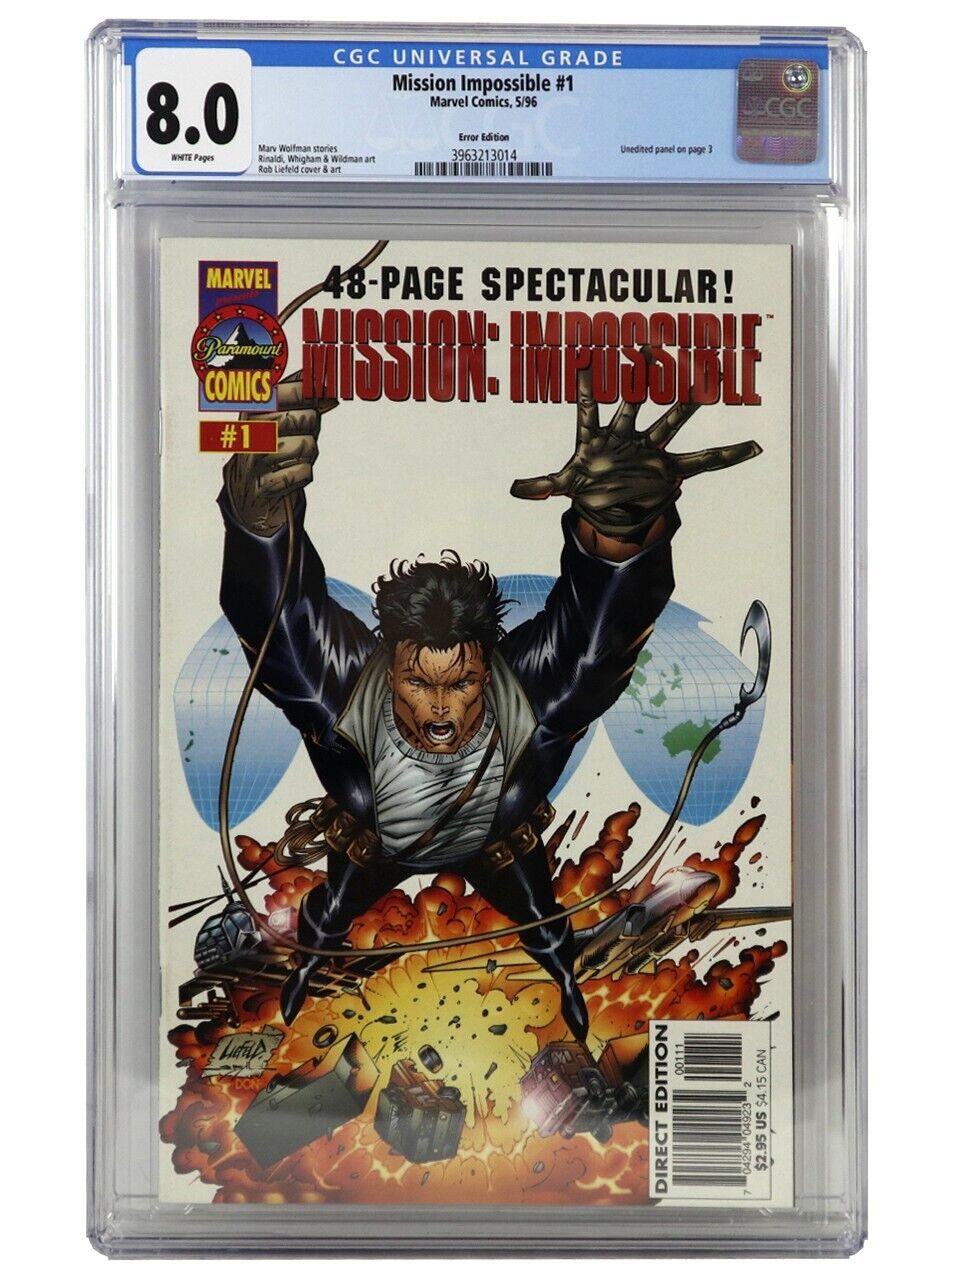 Mission Impossible #1 CGC Graded 8.0 Recalled Error Edition Liefeld Marvel 1996